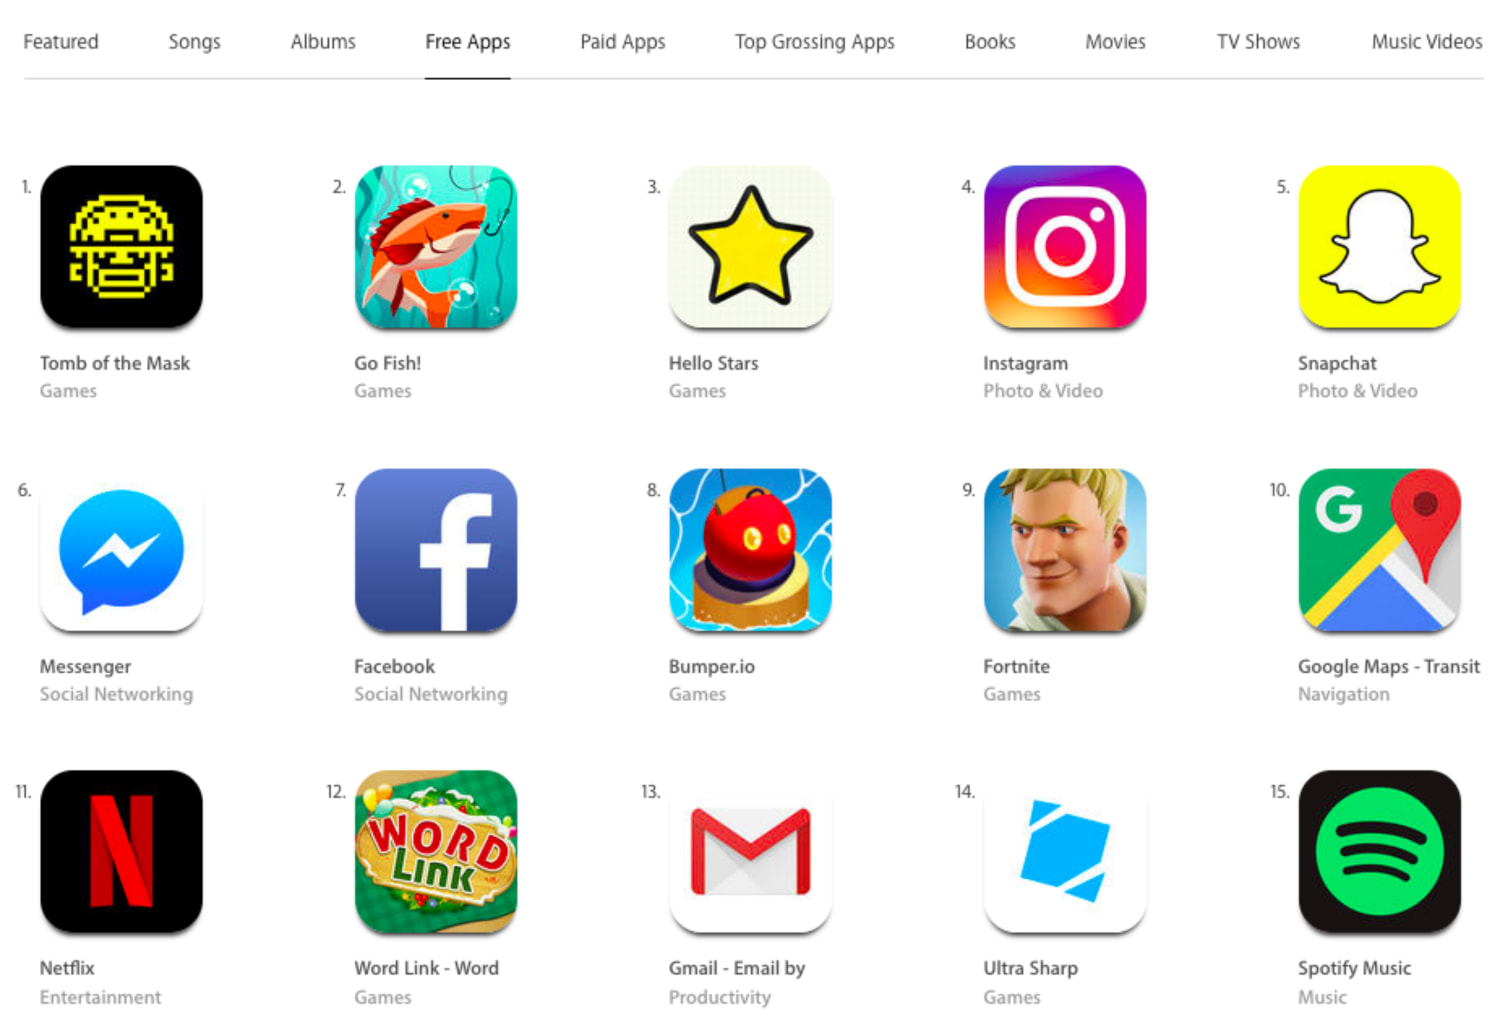 A stats based look at the iTunes App Charts